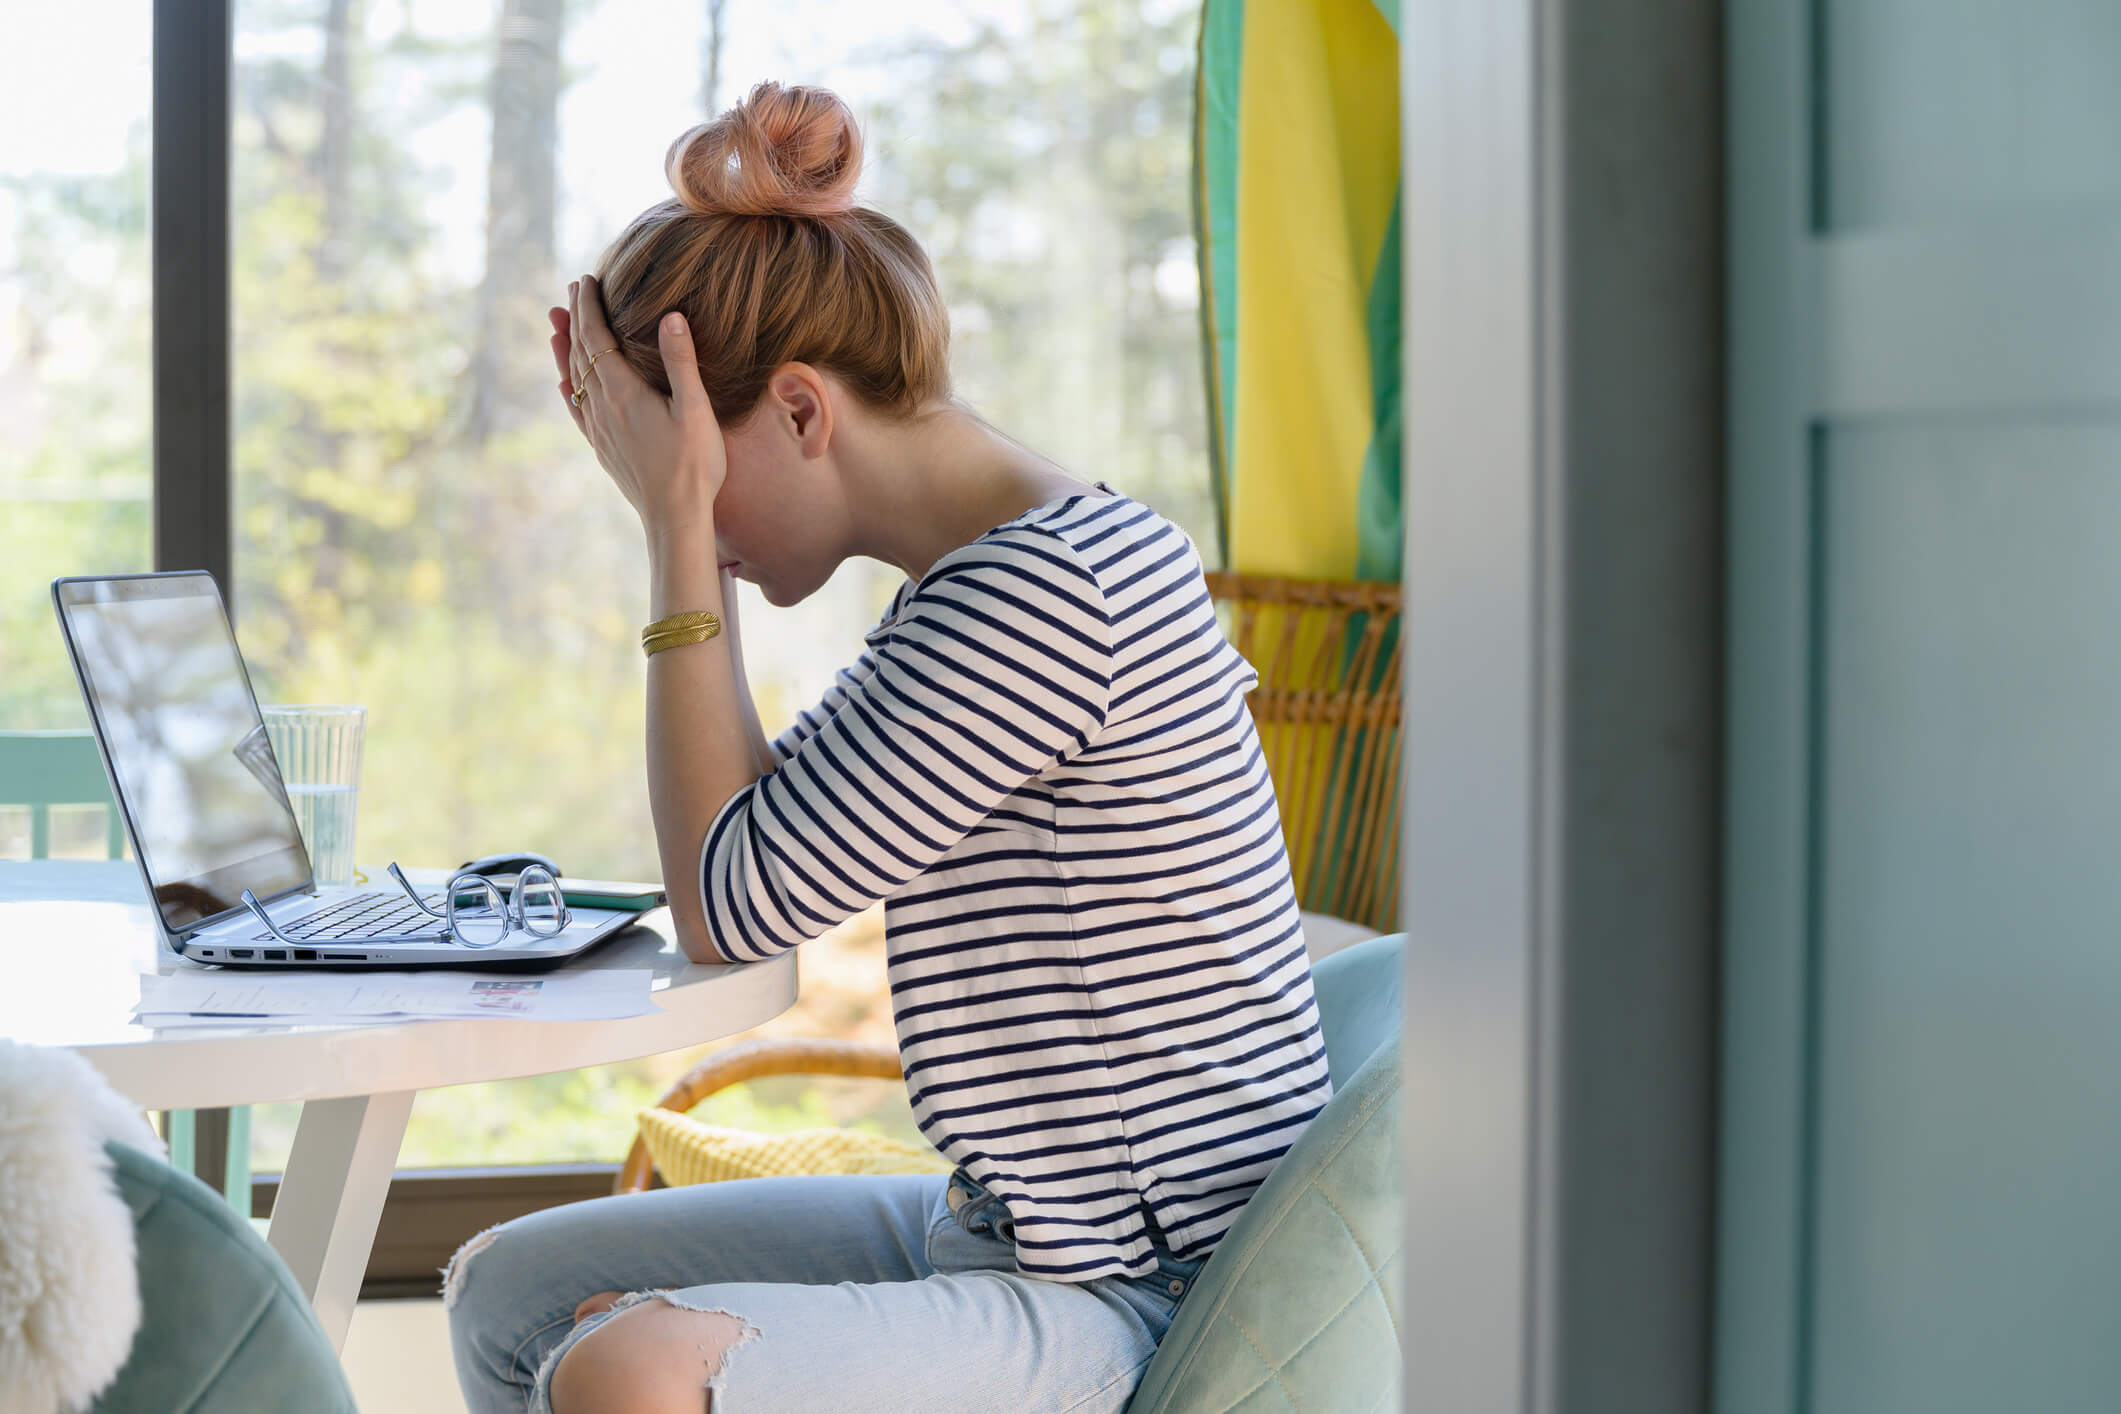 Symptoms of professional burnout syndrome. How to spot them in your employee?